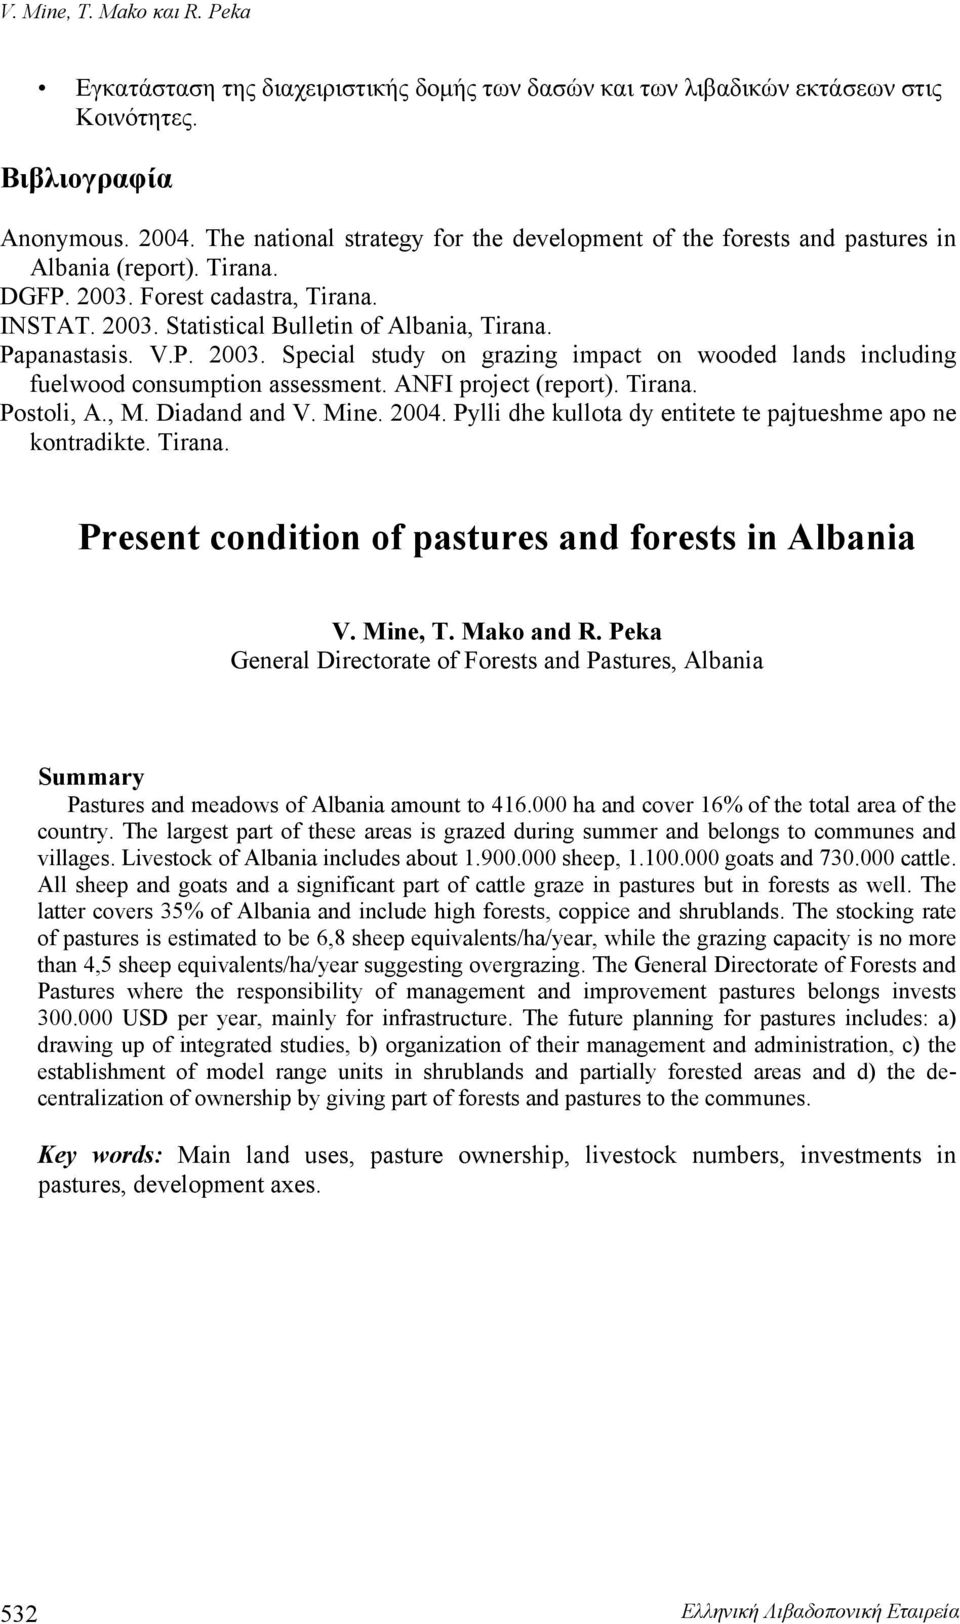 Papanastasis. V.P. 2003. Special study on grazing impact on wooded lands including fuelwood consumption assessment. ANFI project (report). Tirana. Postoli, A., M. Diadand and V. Mine. 2004.